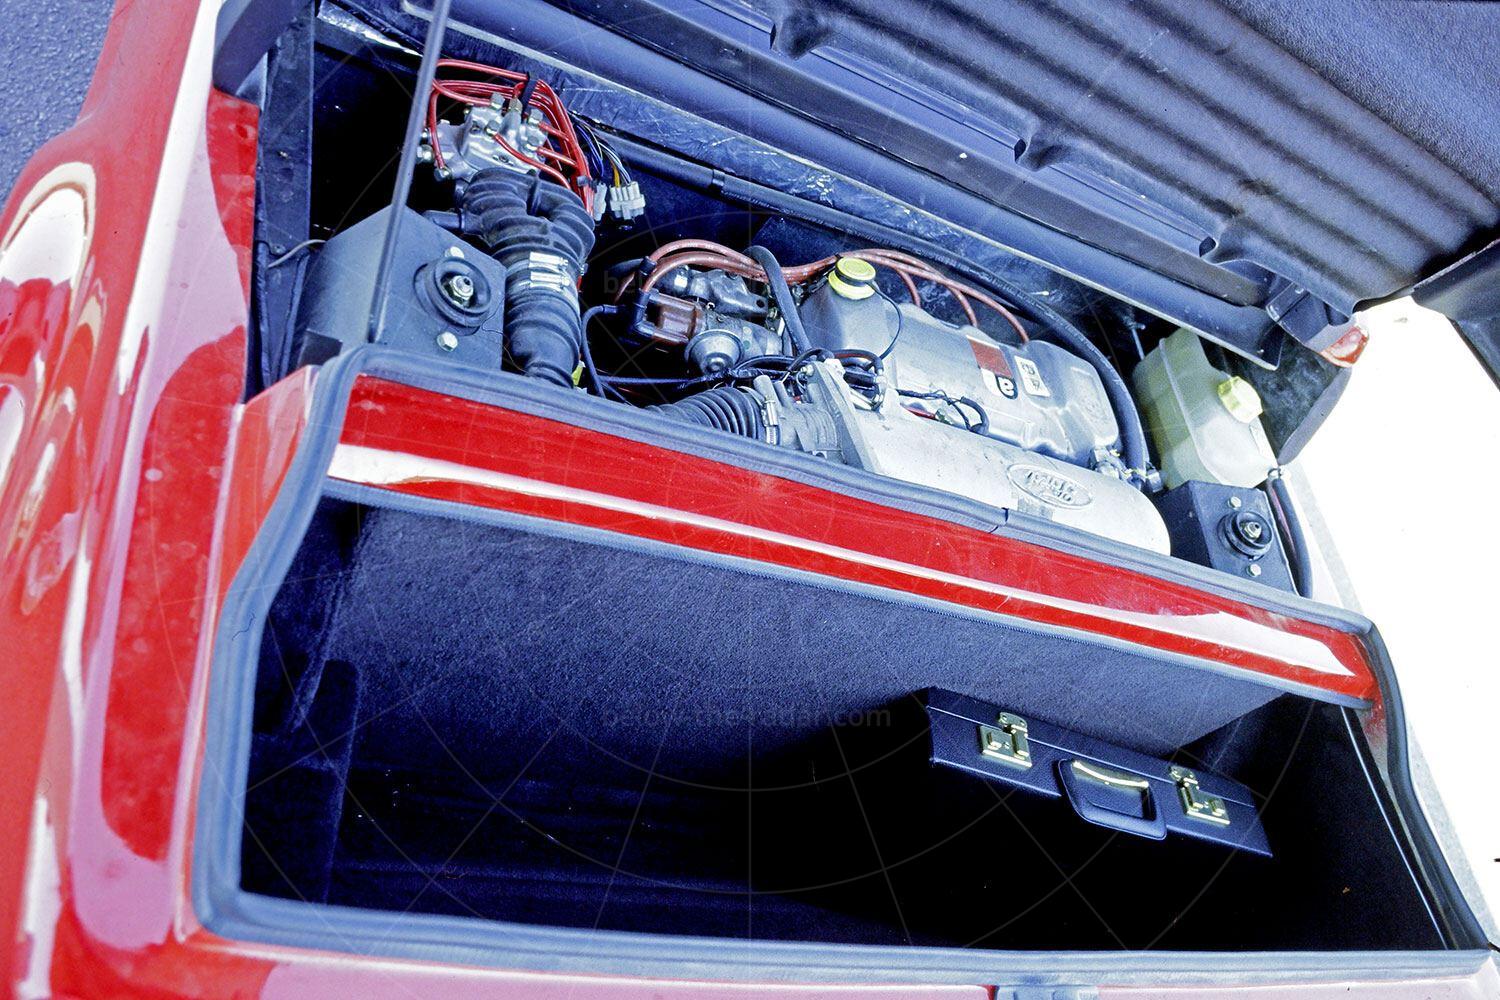 The engine bay of the Auto Express G32 test car Pic: magiccarpics.co.uk | The engine bay of the Auto Express G32 test car